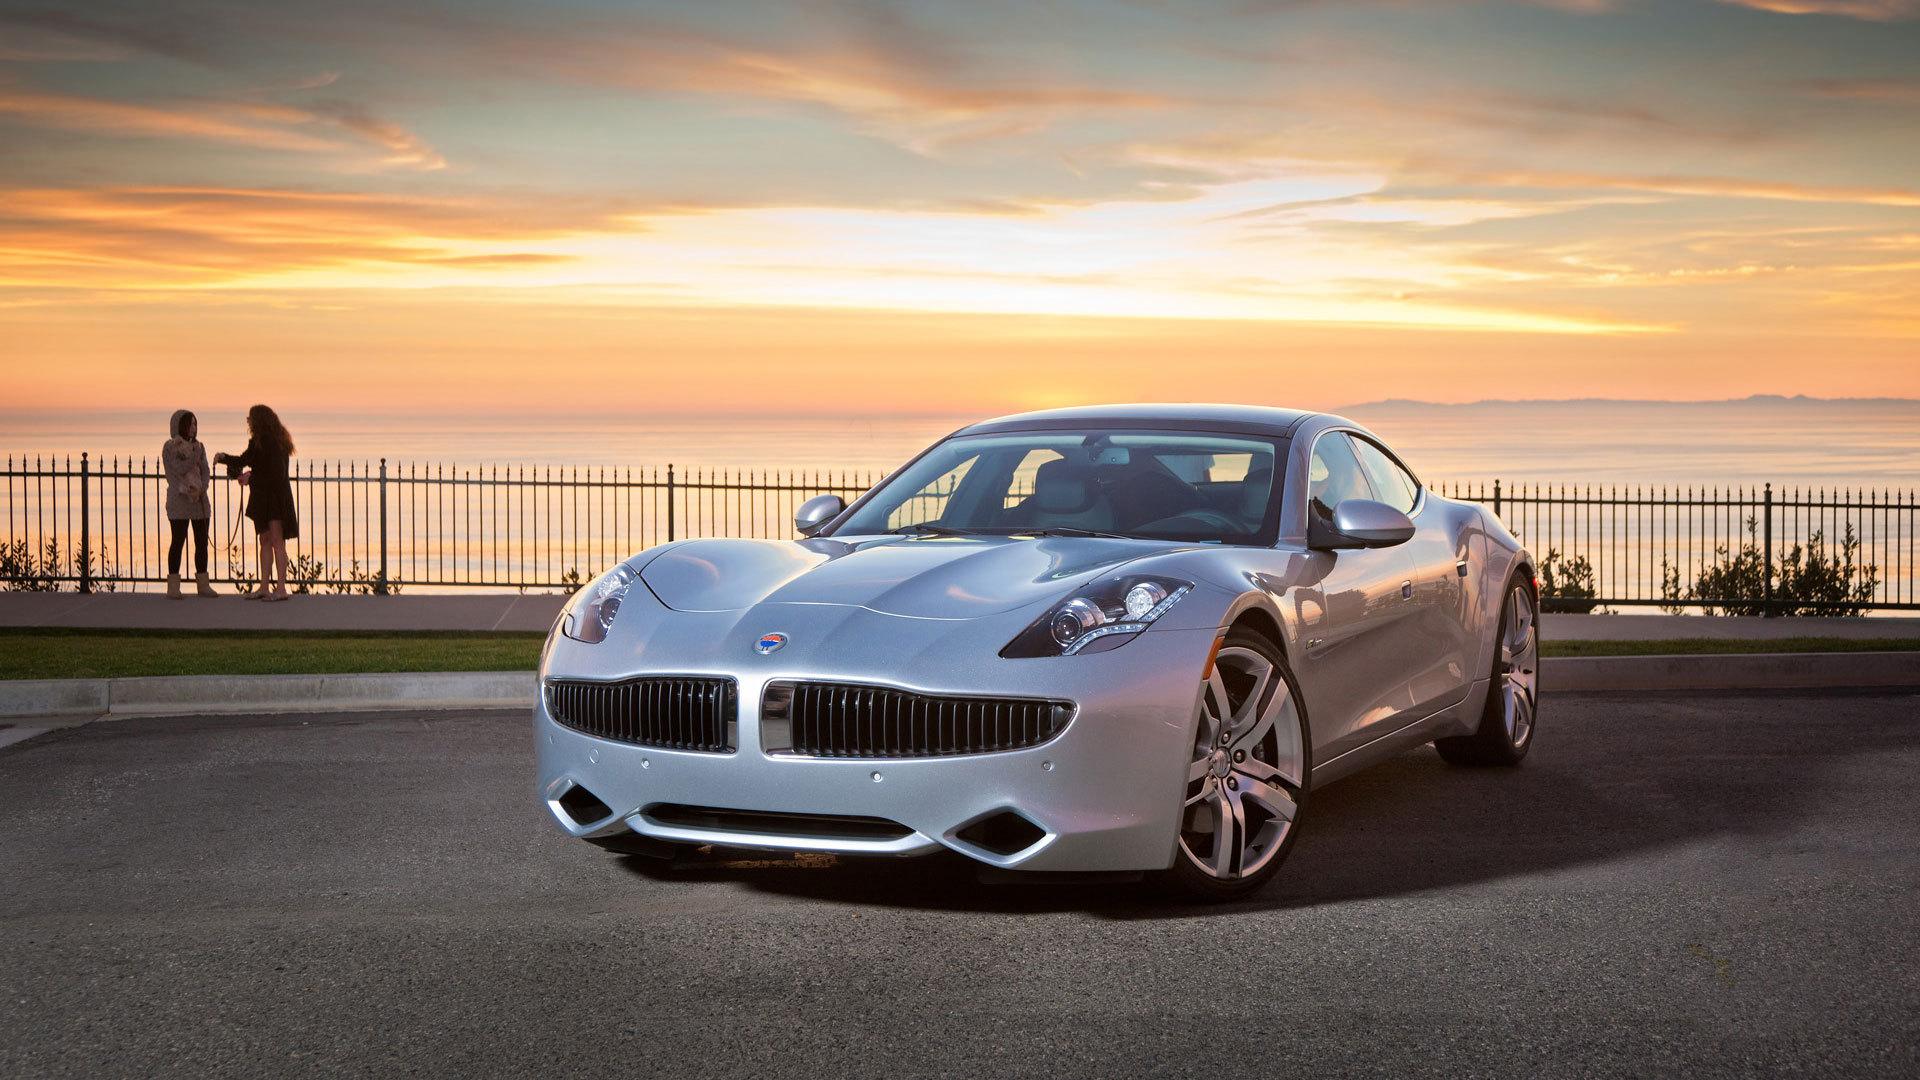 Fisker Karma Wallpaper Image Photo Picture Background